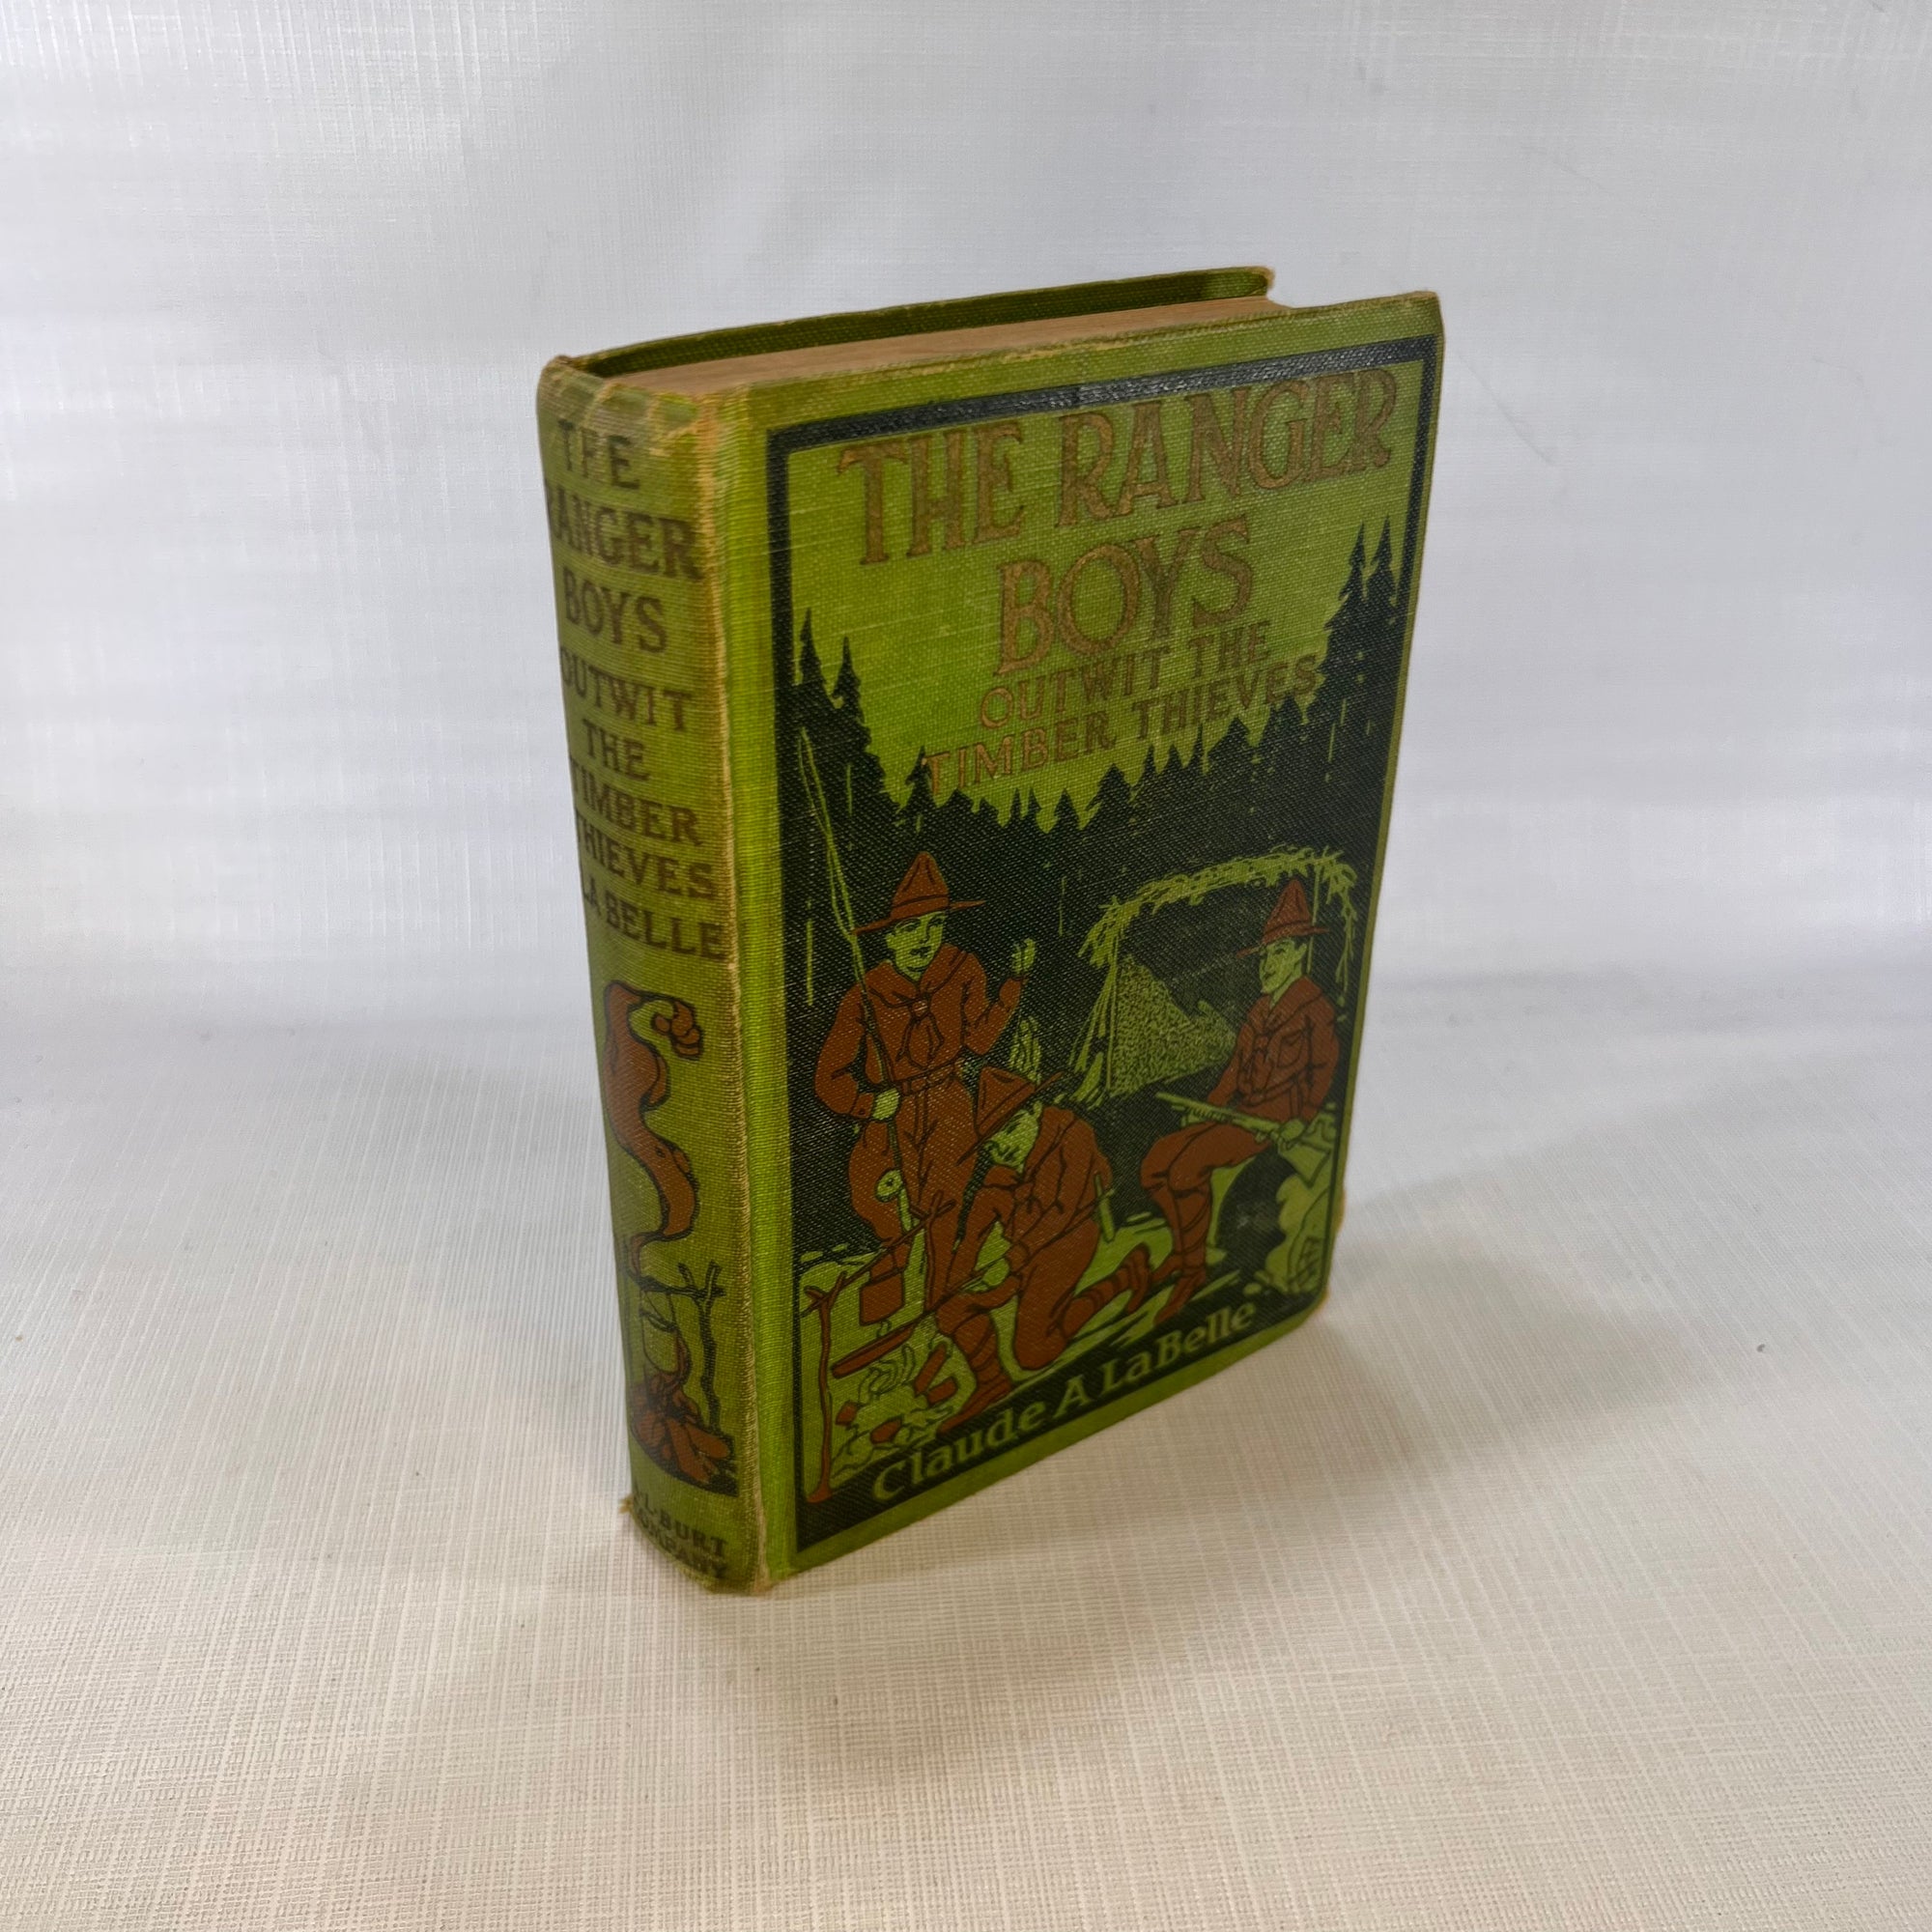 The Ranger Boys Outwit the Timber Thieves by Claude A. Labelle 1922 A.L. Burt Company